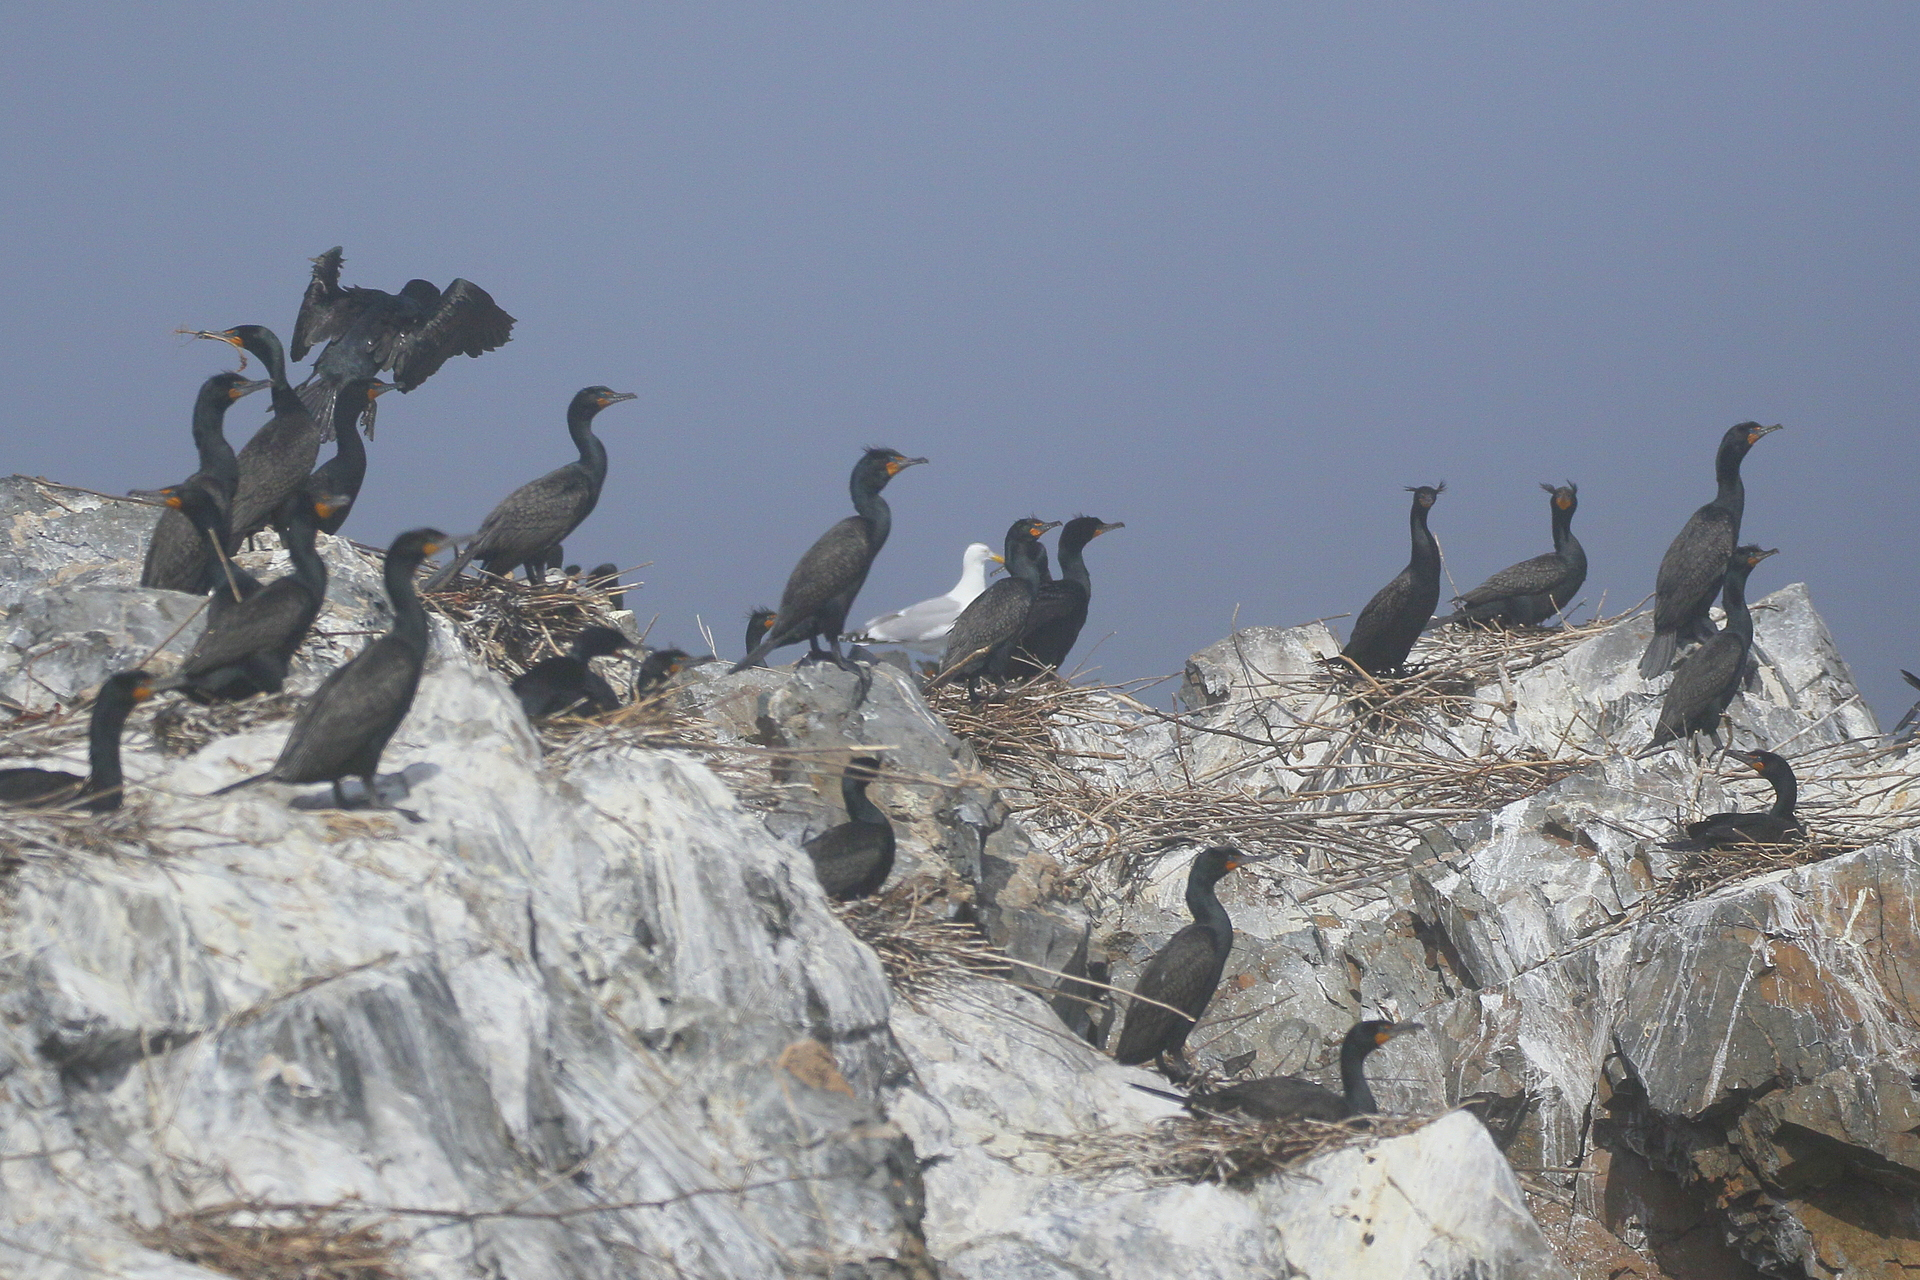 Group of Double-crested Cormorants on rocks. One gull also among the birds.